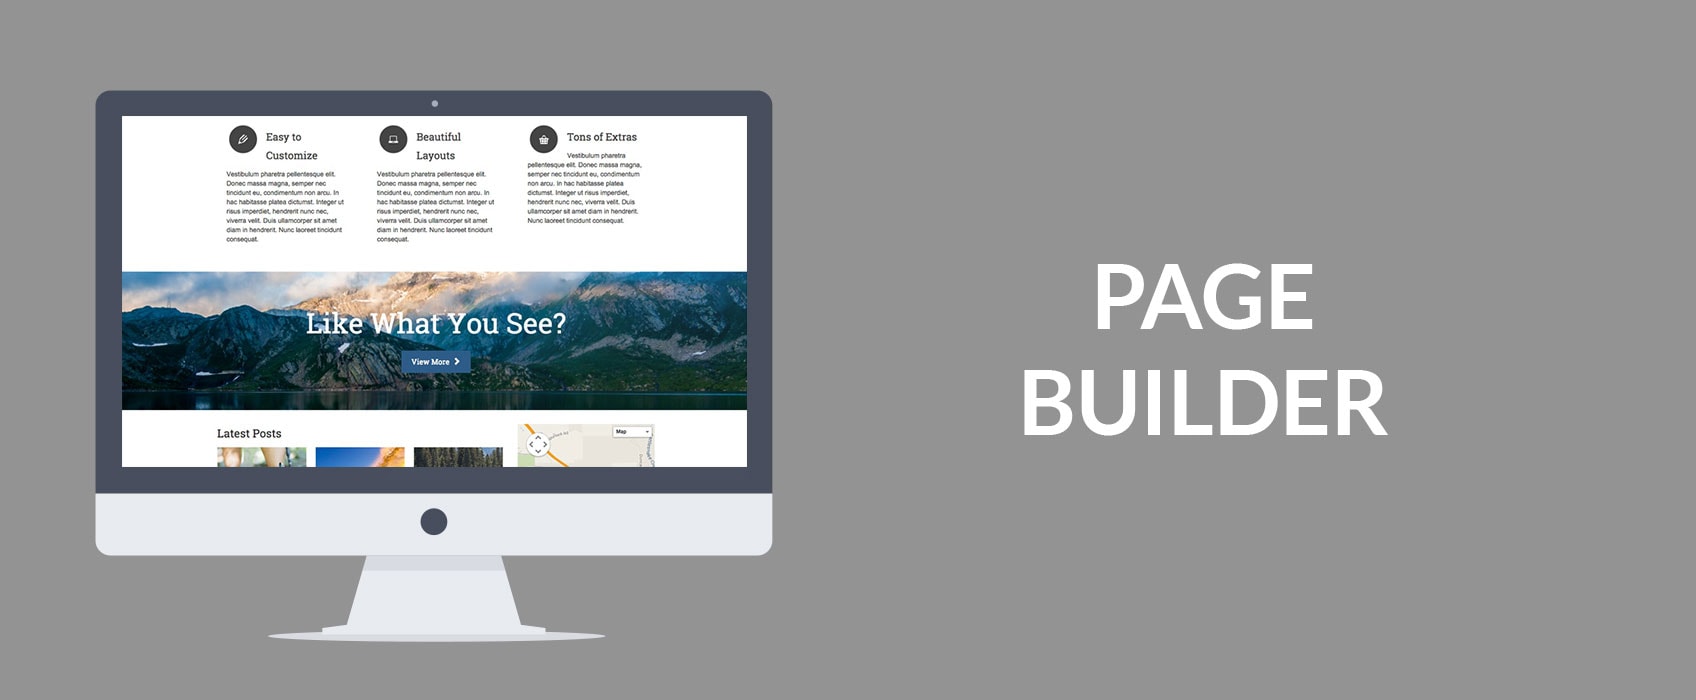 Using Page Builder by SiteOrigin